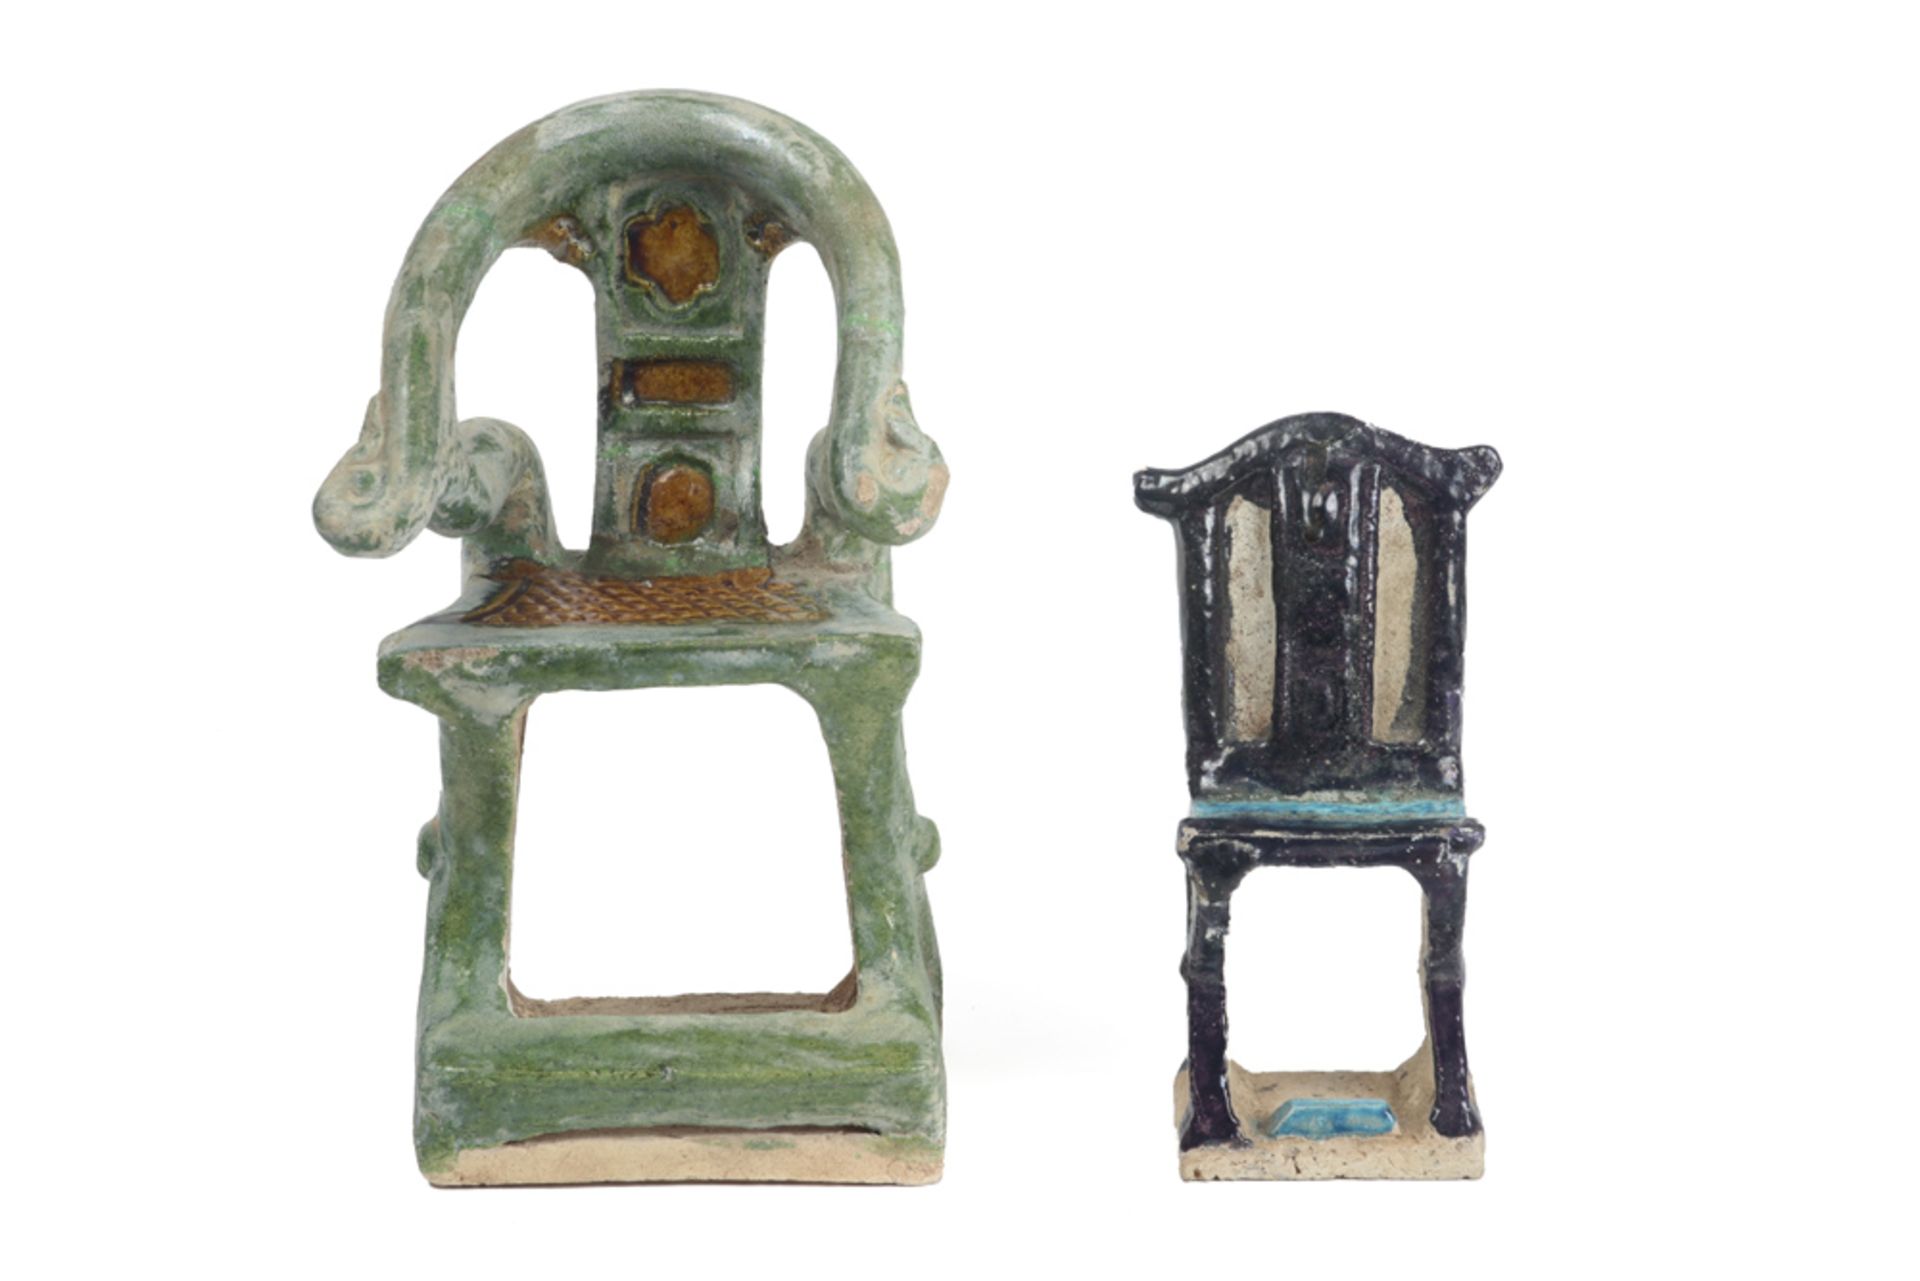 two Chinese Ming period tomb furniture items (chairs) in glazed earthenware || CHINA - MING-DYNASTIE - Bild 2 aus 5